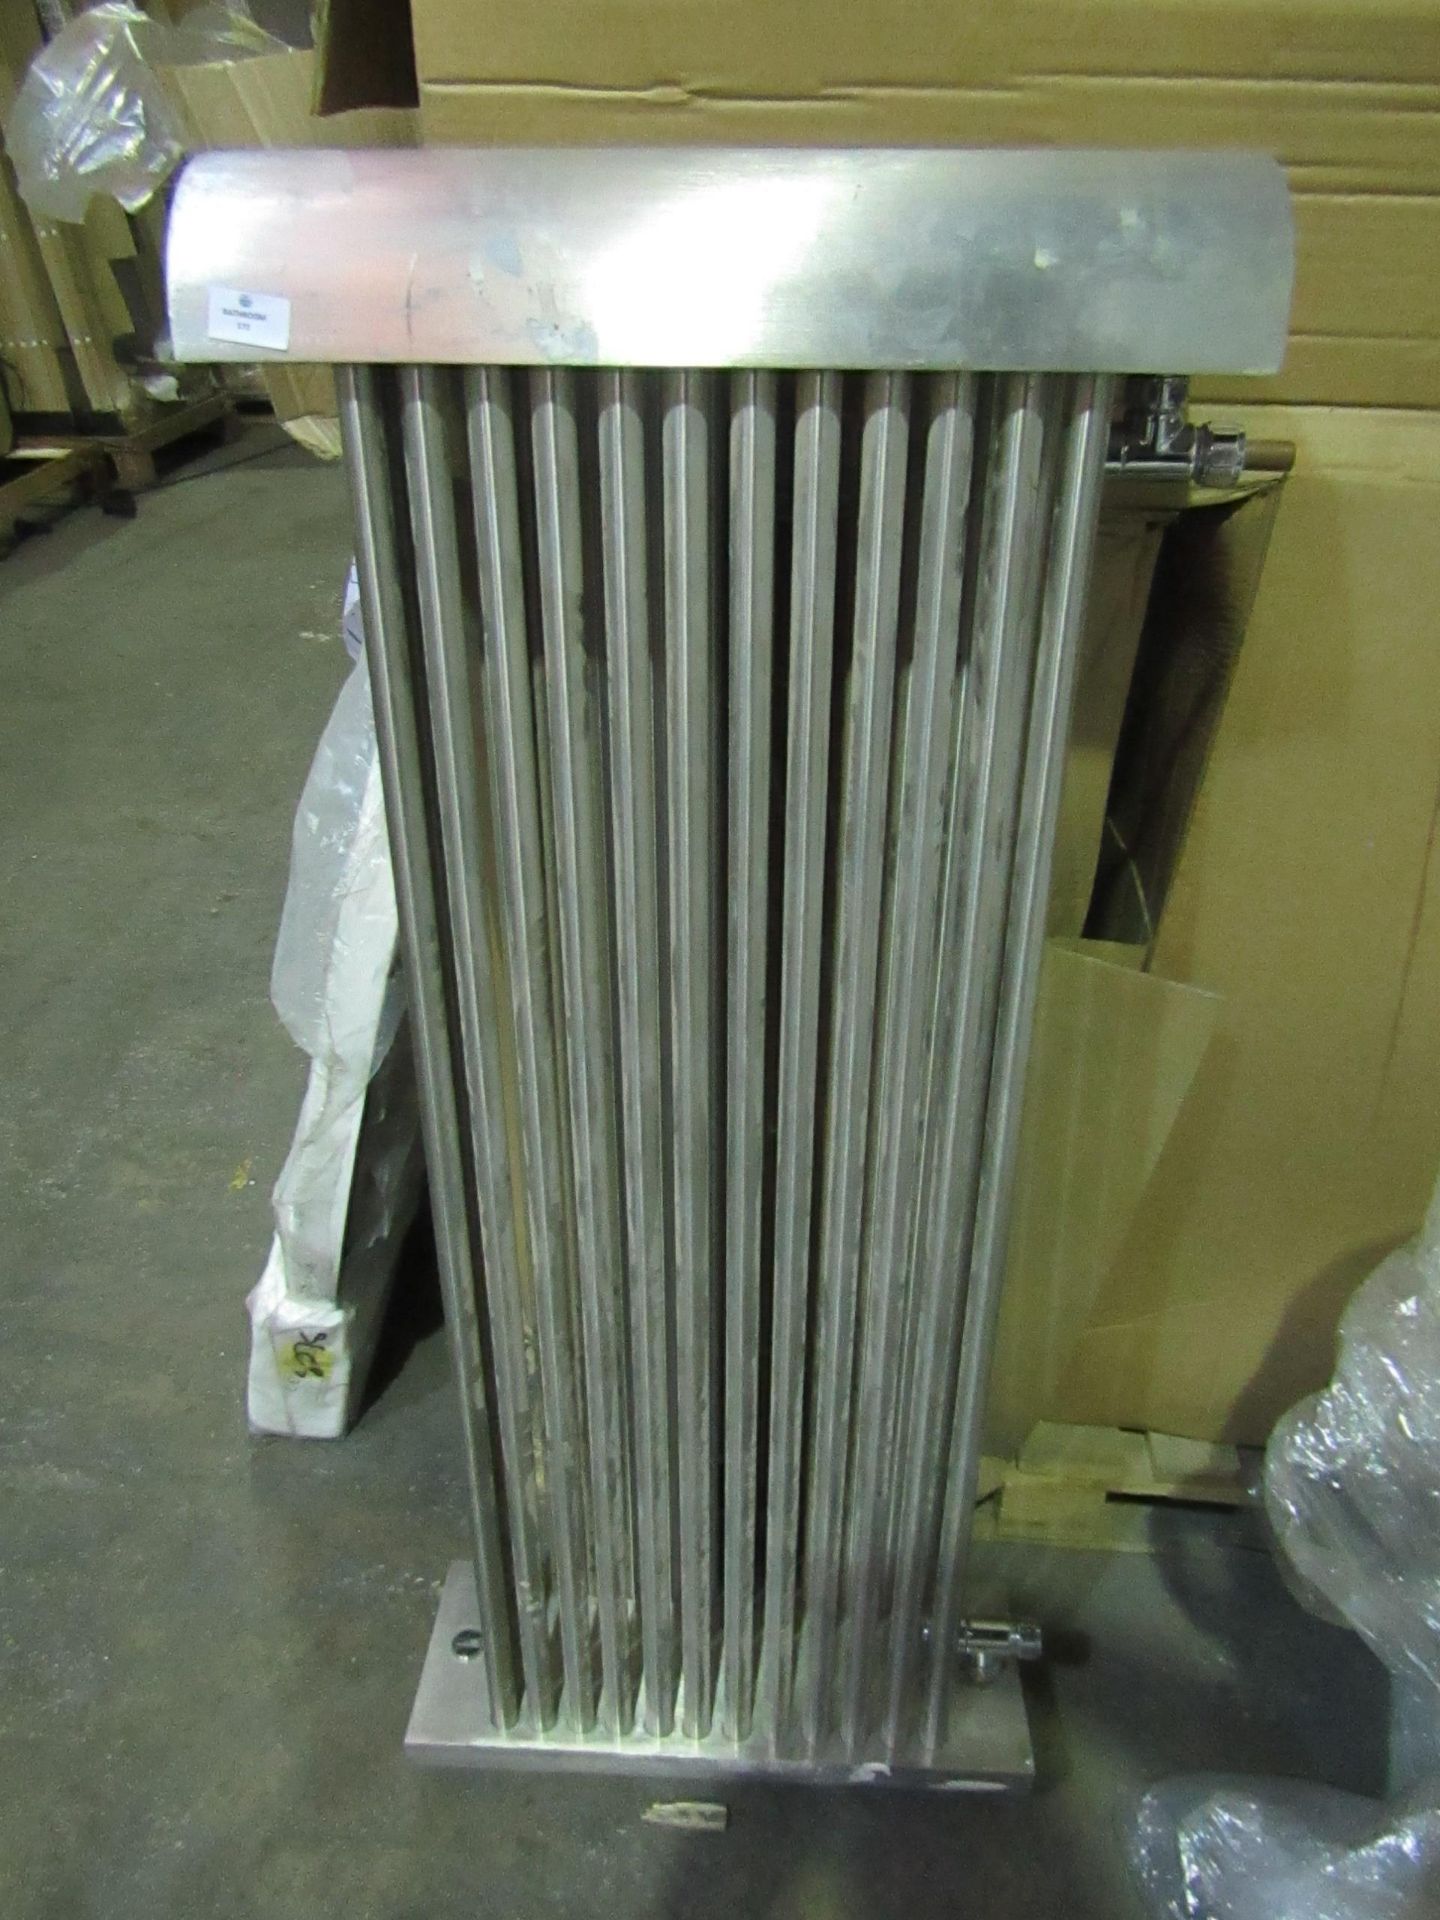 Heavy Steel Radiator - Item Contains Scratches & Scuff Marks - No Packaging.